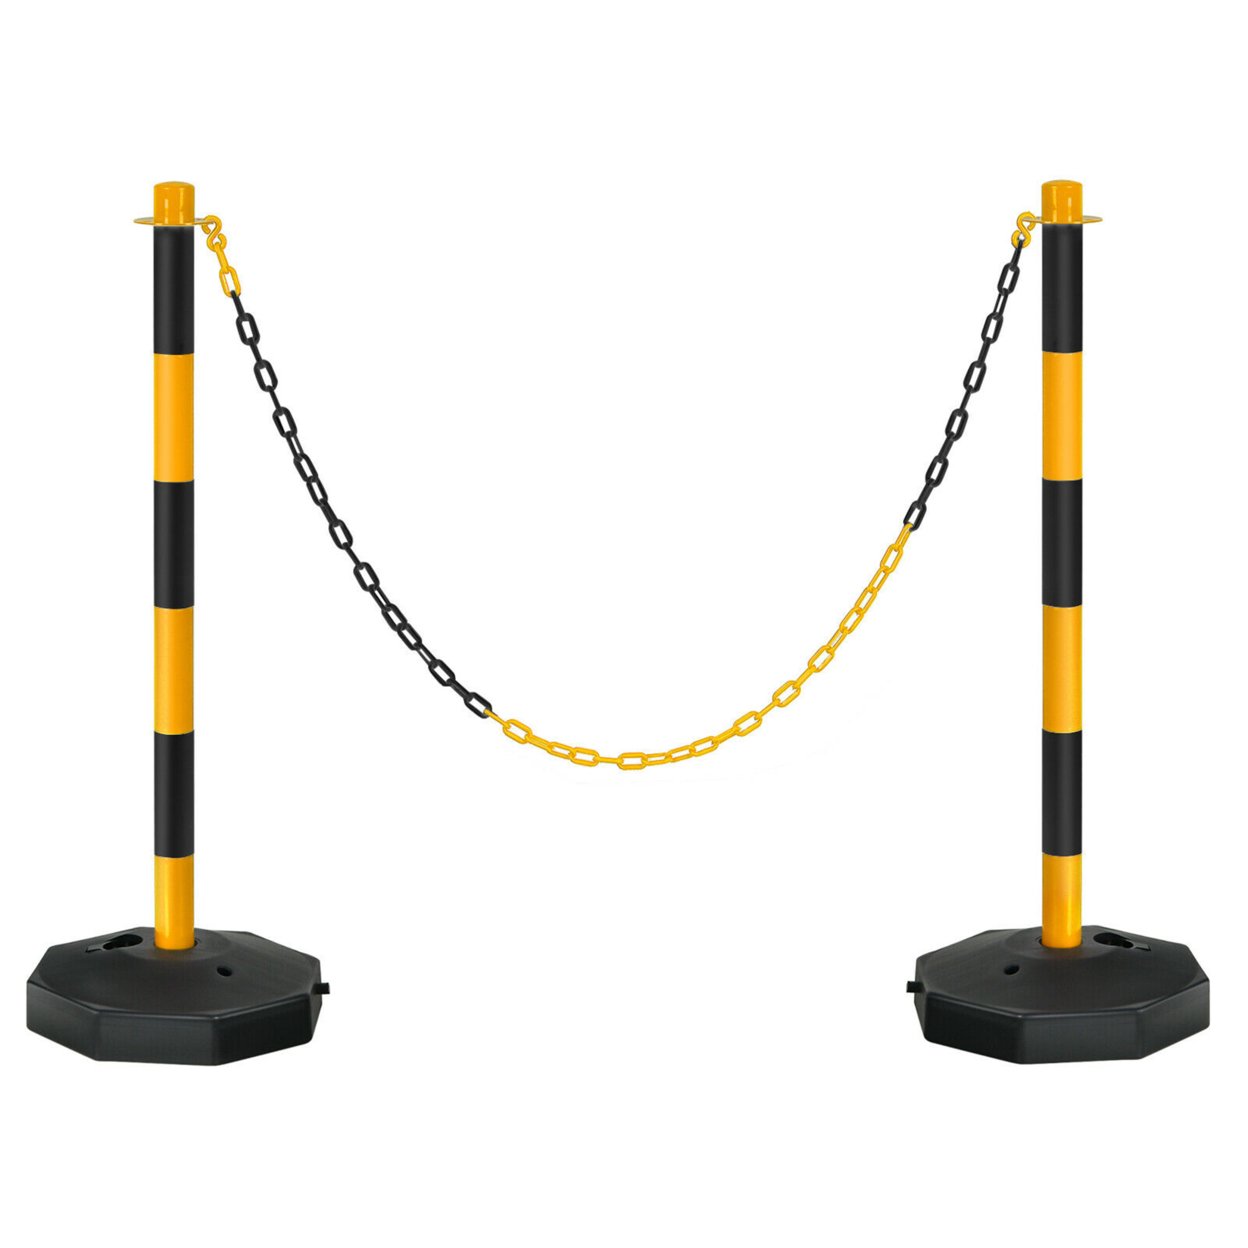 2PCS Traffic Delineator Pole Safety Caution Barrier W/ 5ft Link Chains - Yellow & Black